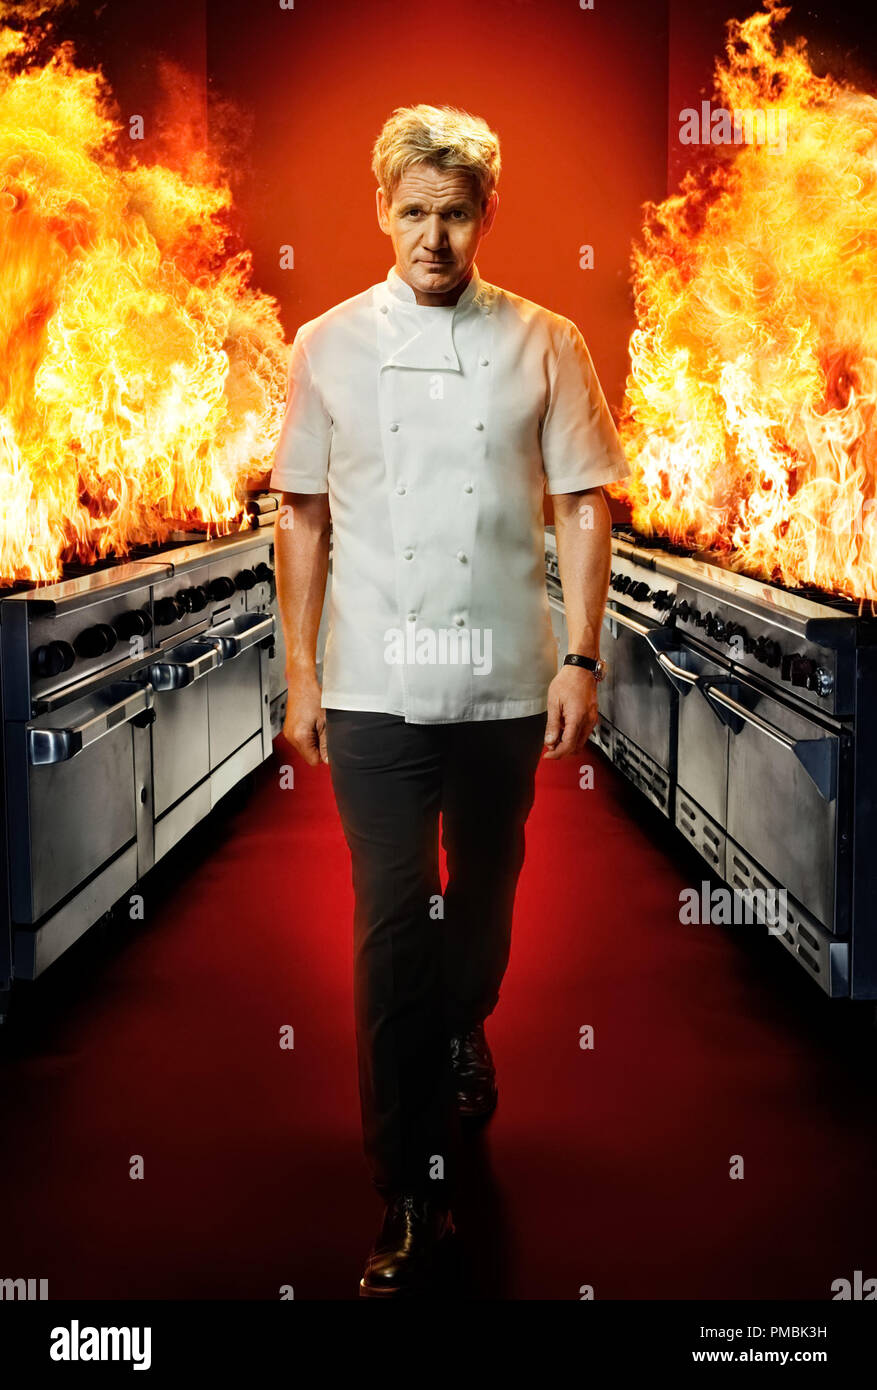 HELL'S KITCHEN: The competition heats up when Chef Gordon Ramsay returns  with Season 12 of HELL'S KITCHEN Stock Photo - Alamy